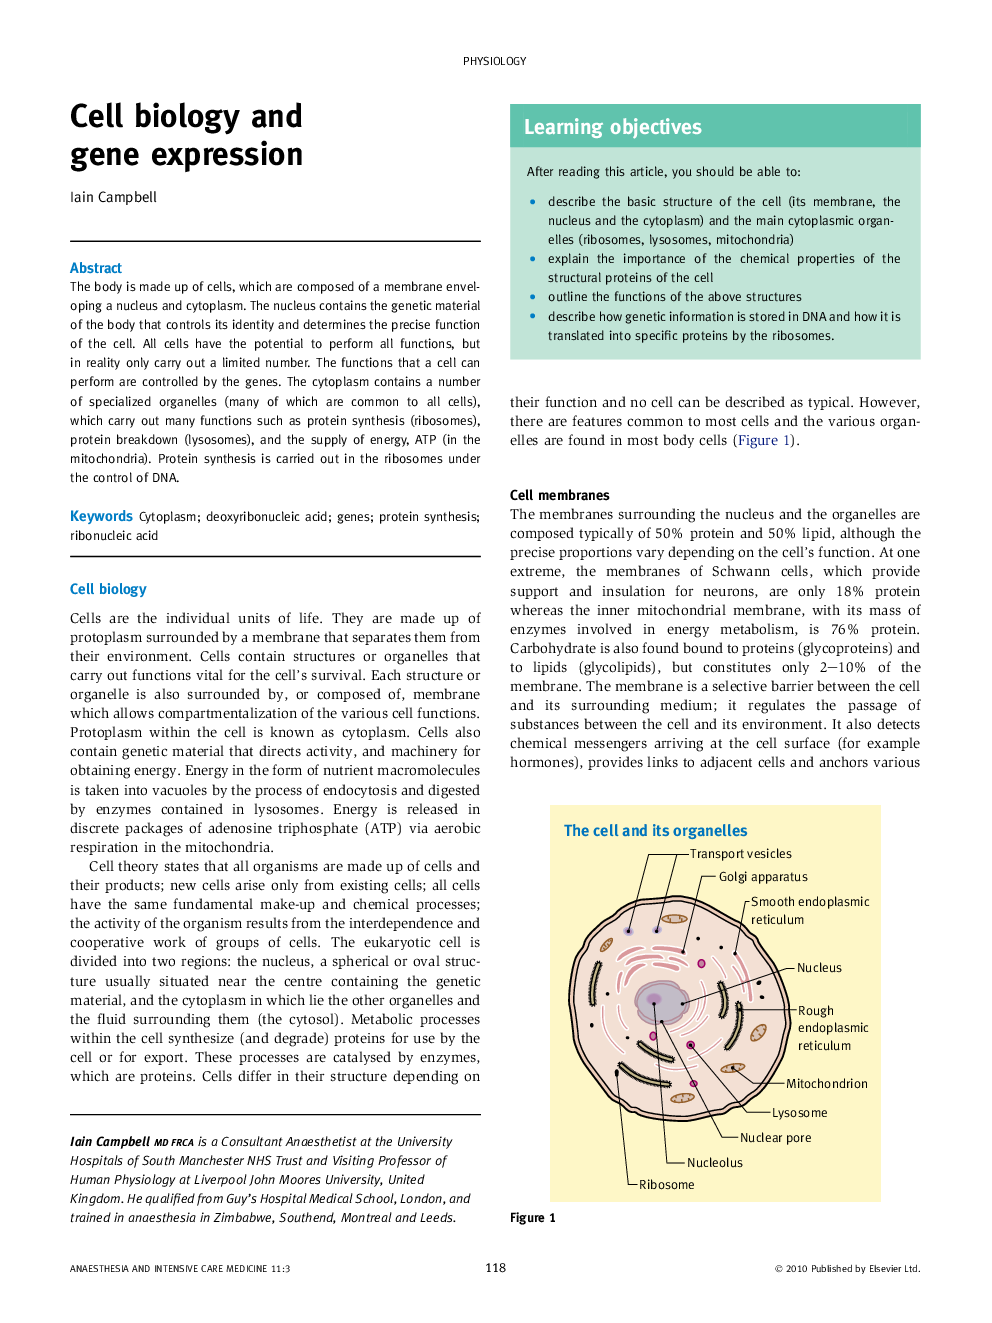 Cell biology and gene expression